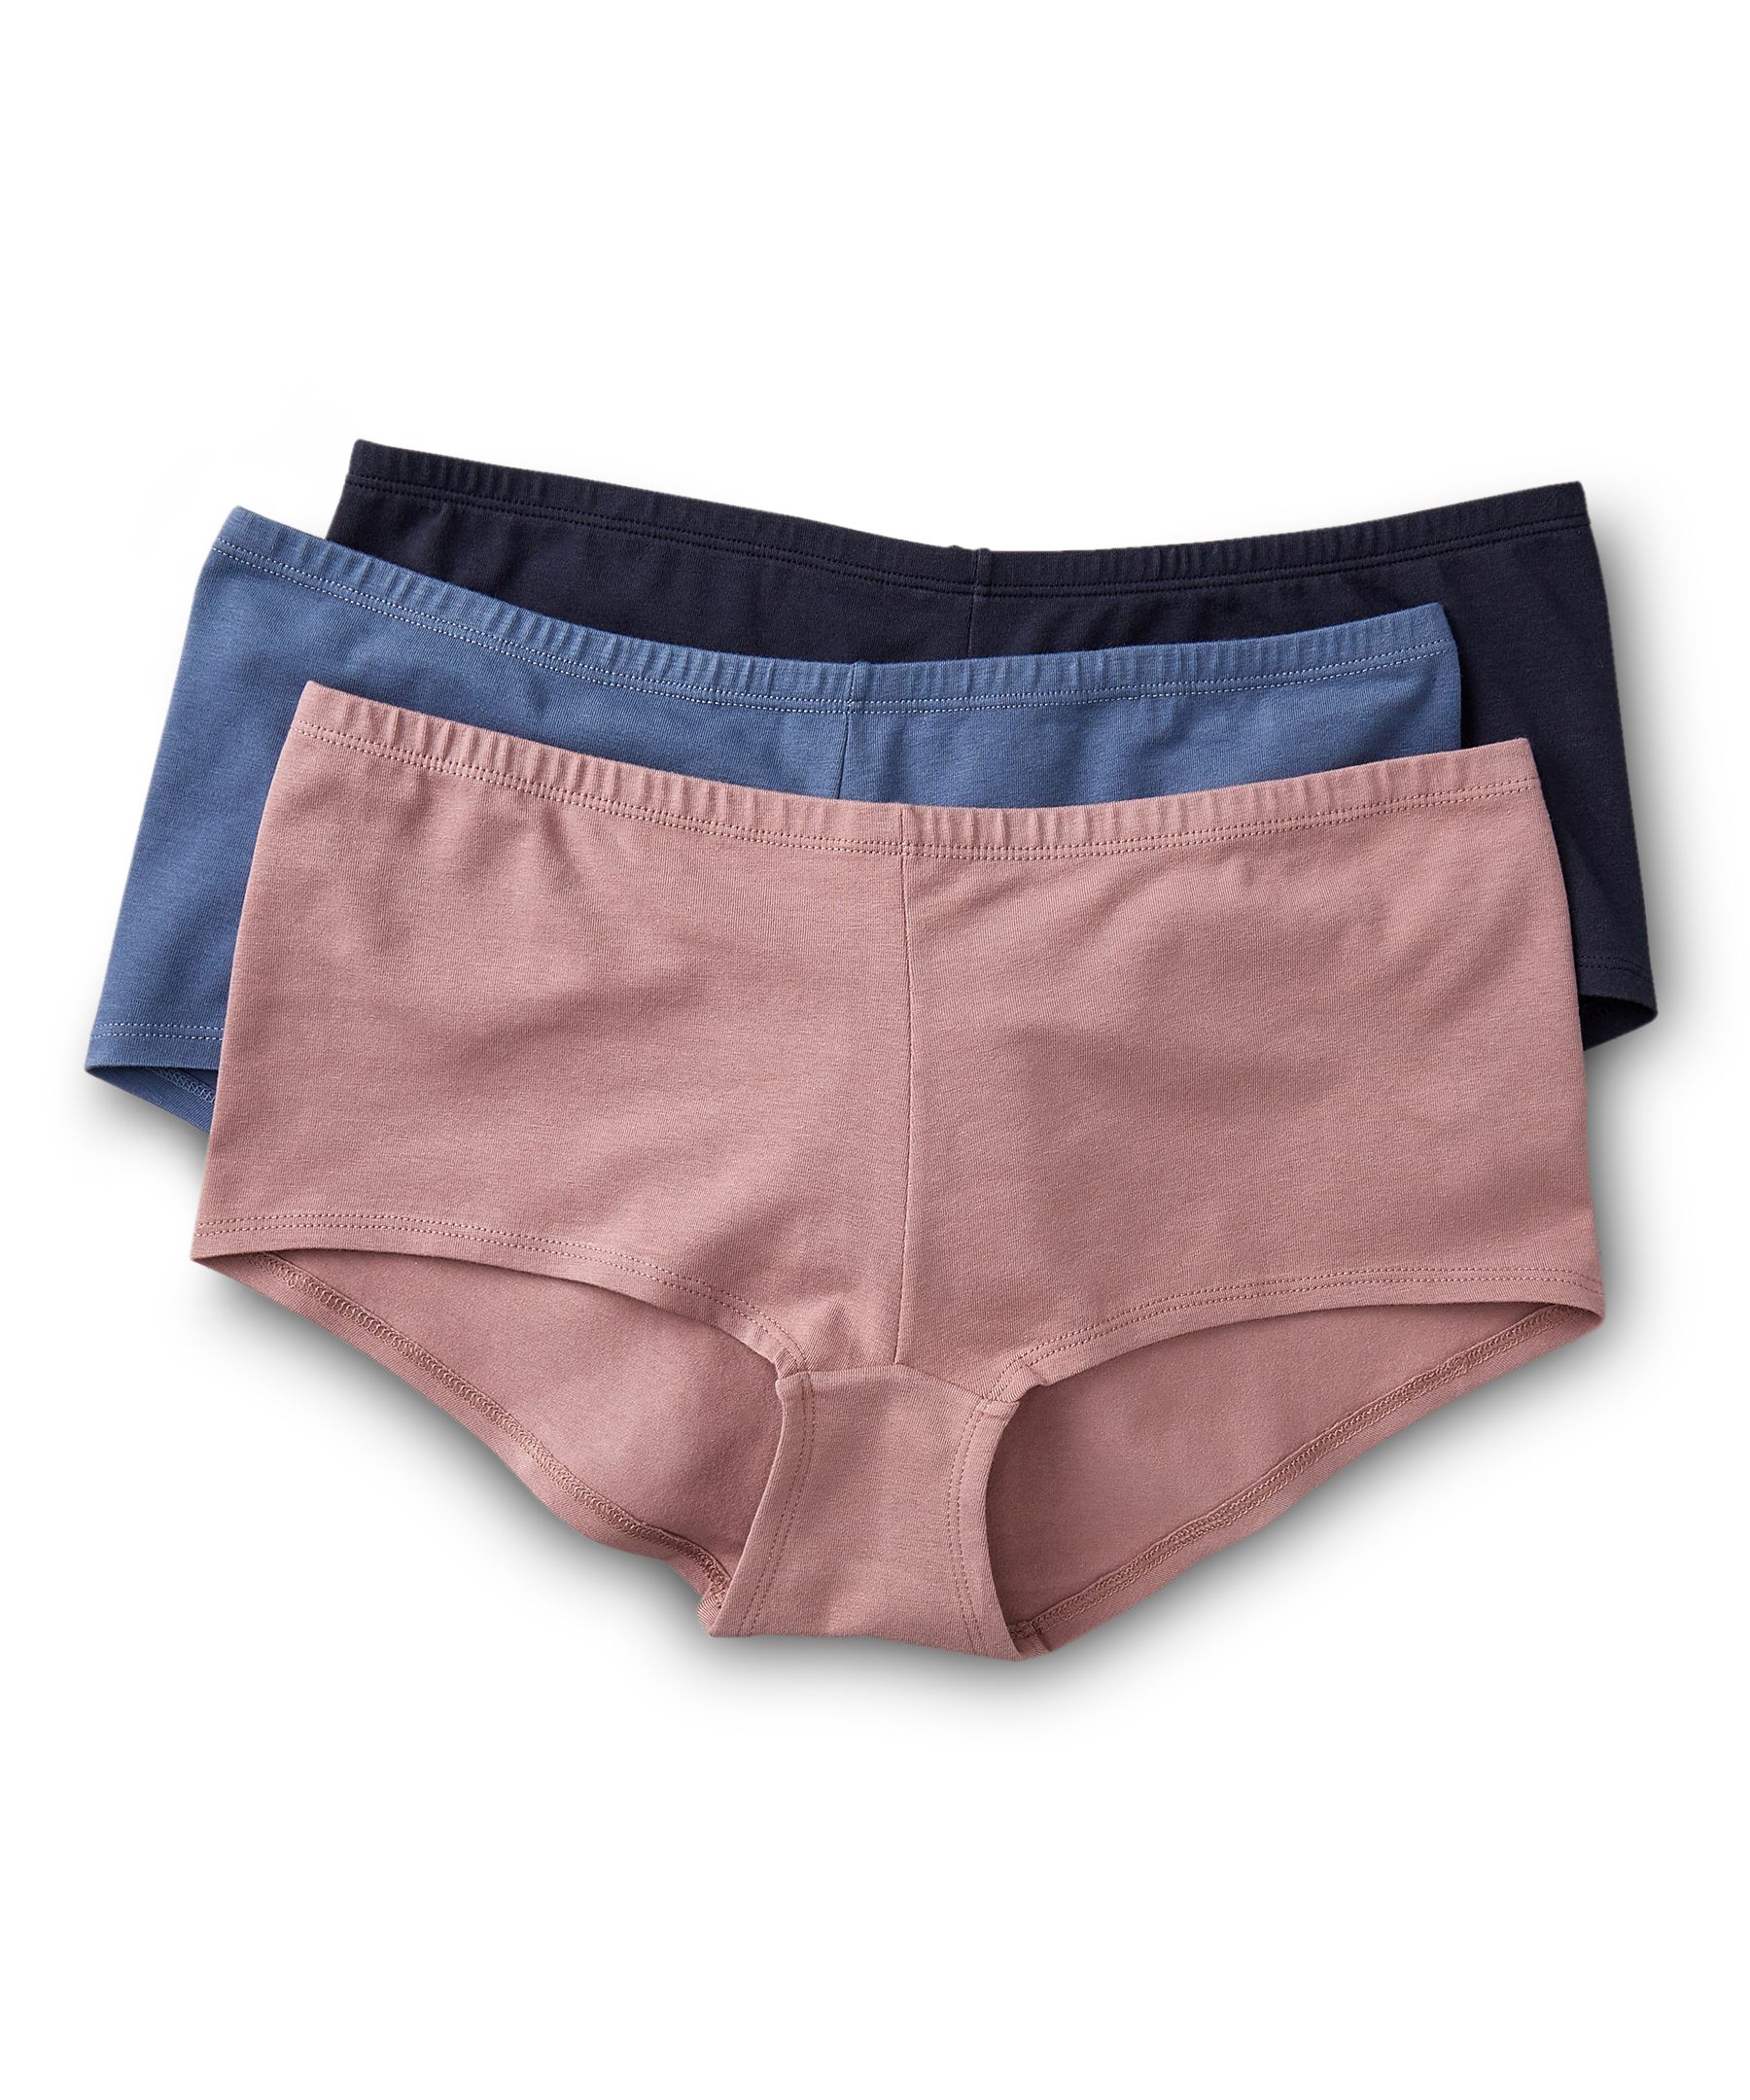 Icebreaker Women's 200 Oasis Year-round Layering Boy Shorts - ONLINE ONLY